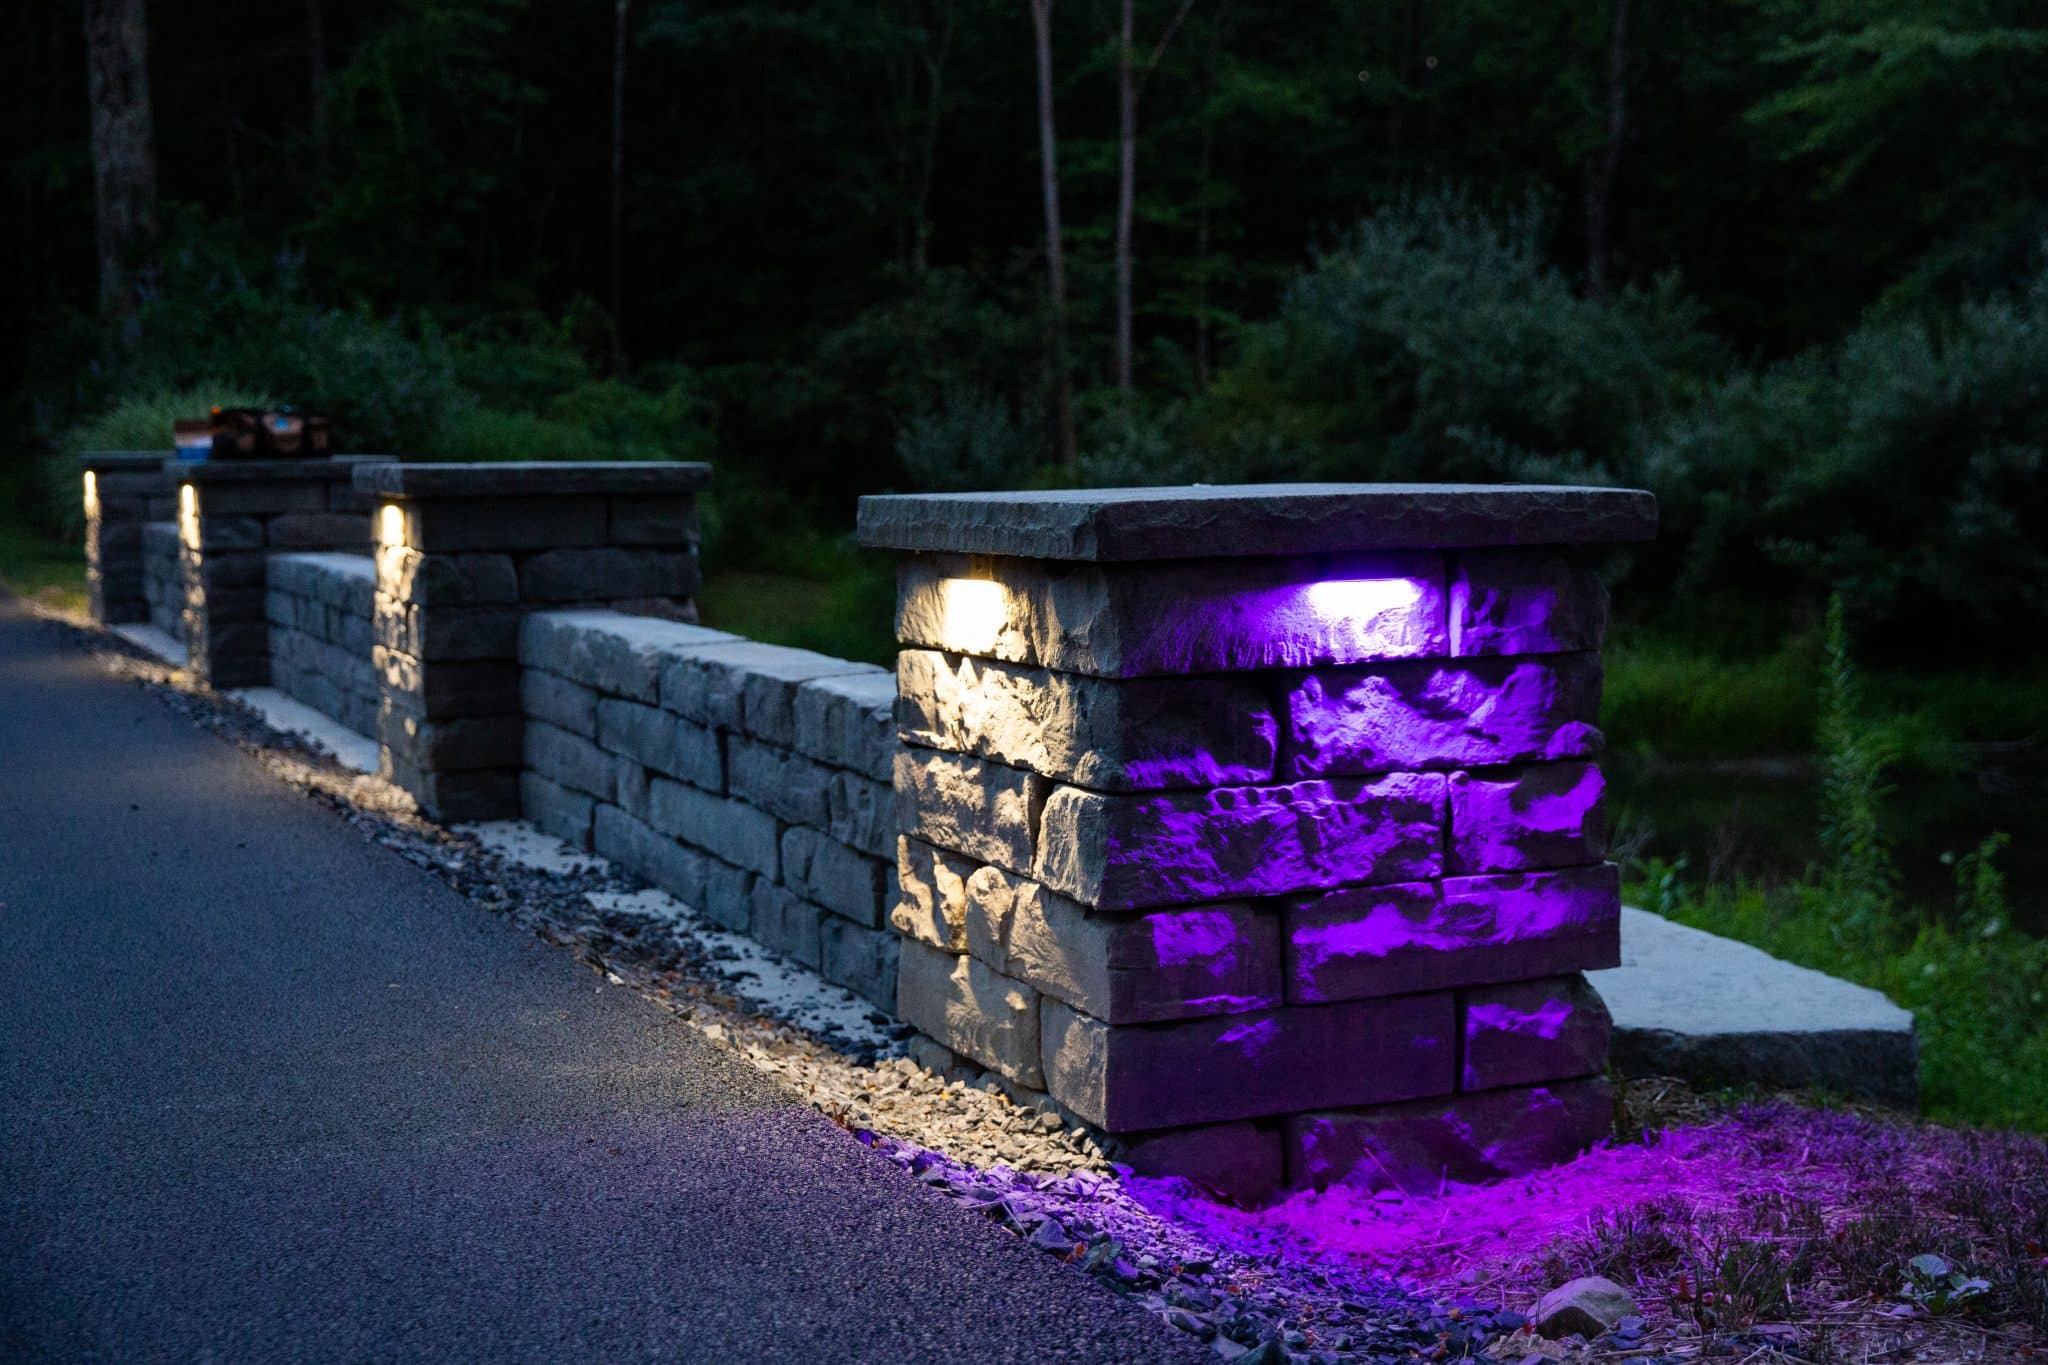 A purple light illuminates a stone-texture precast concrete pillar set into a free standing wall along a driveway. Alliance color-changing LED outdoor lighting and Rosetta Kodah wall installed by Masseo Landscape, Inc.